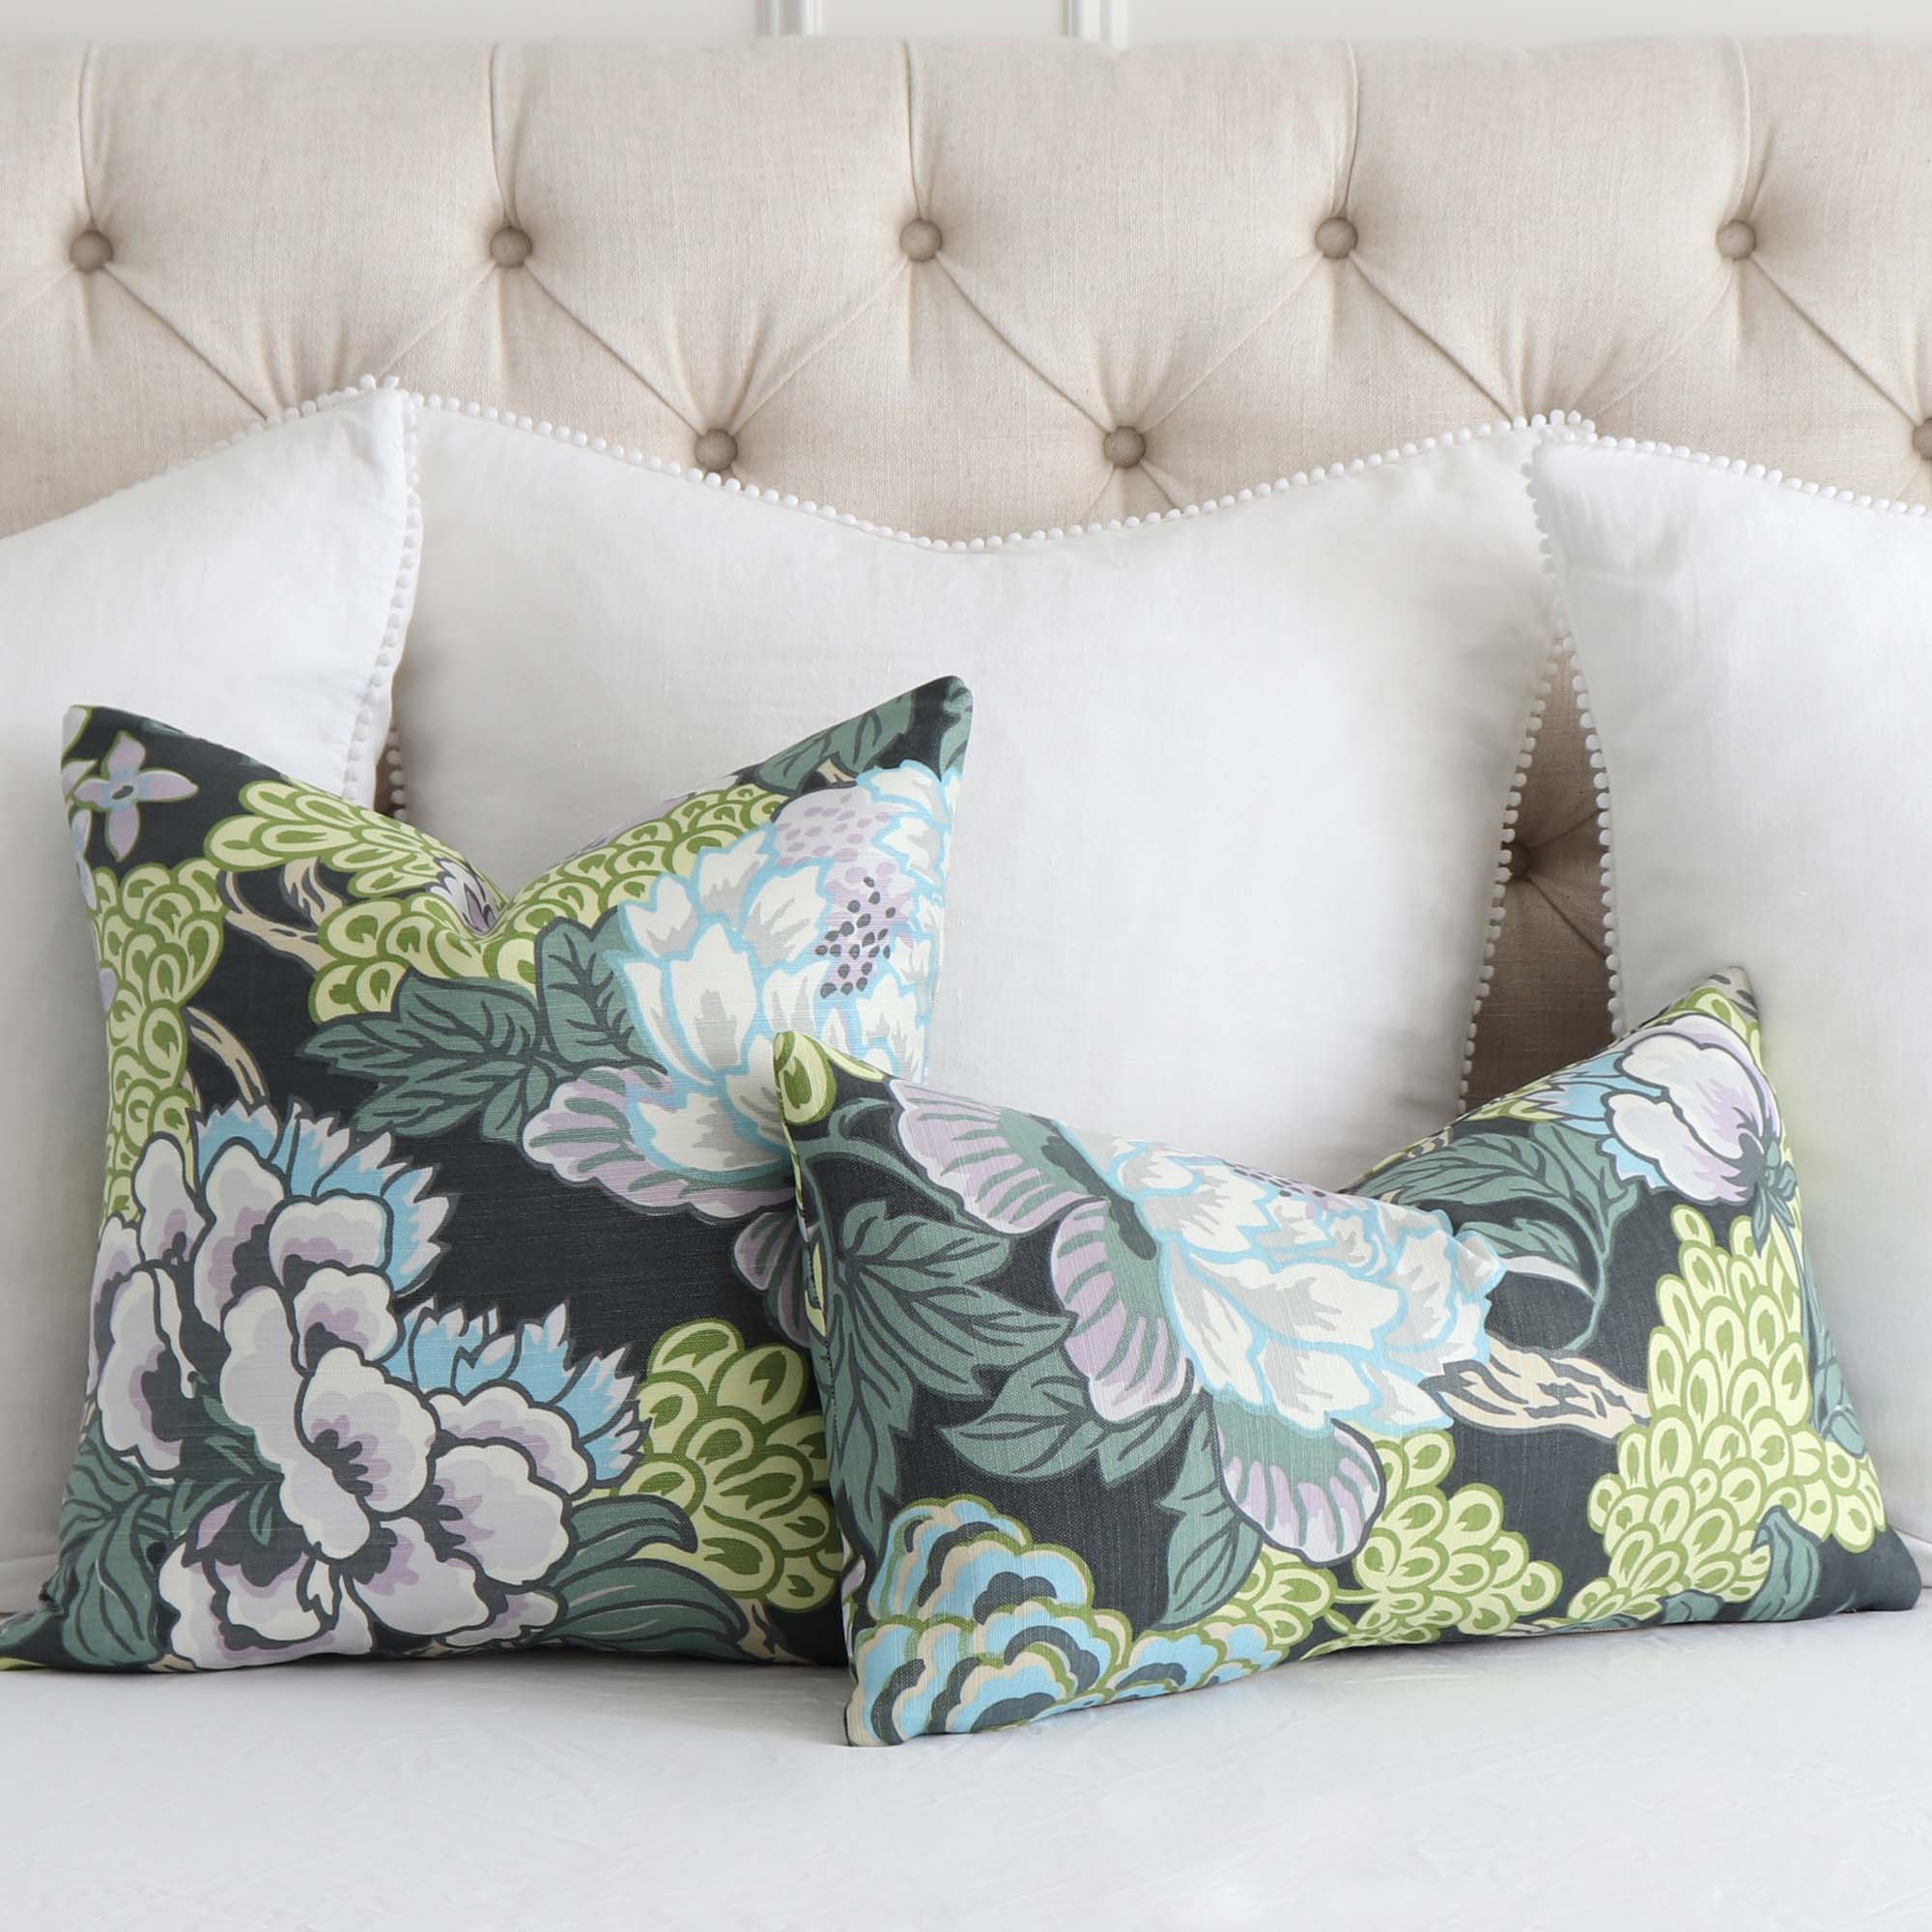 Thibaut Honshu Floral Grey Designer Decorative Throw Pillow Cover on Bed with White Shams